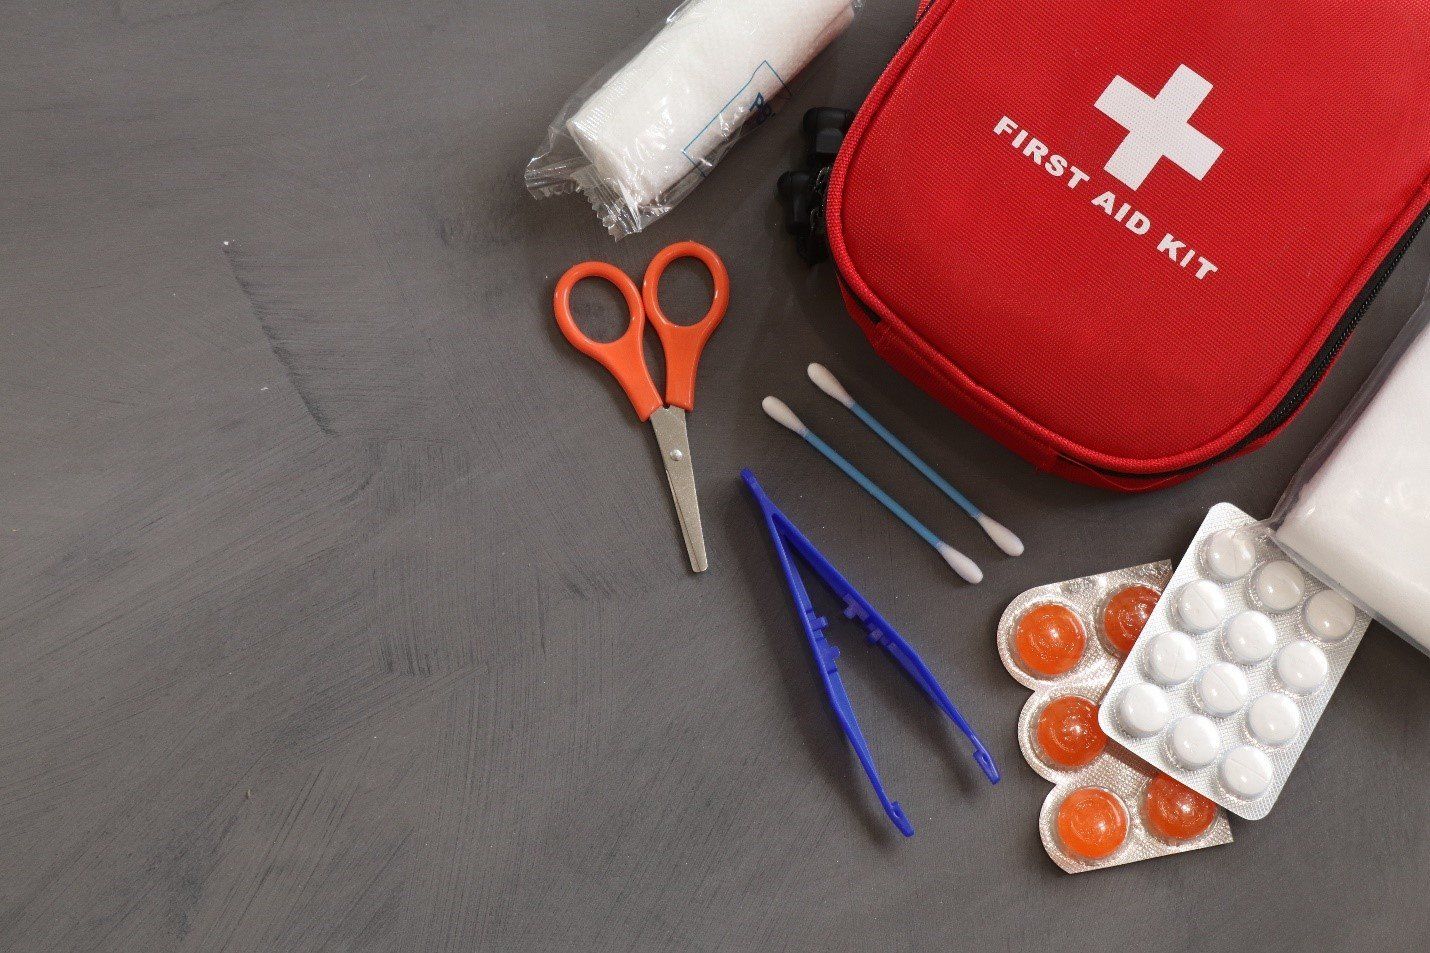 First aid kit, tablets, tweezers, and scissors on the table